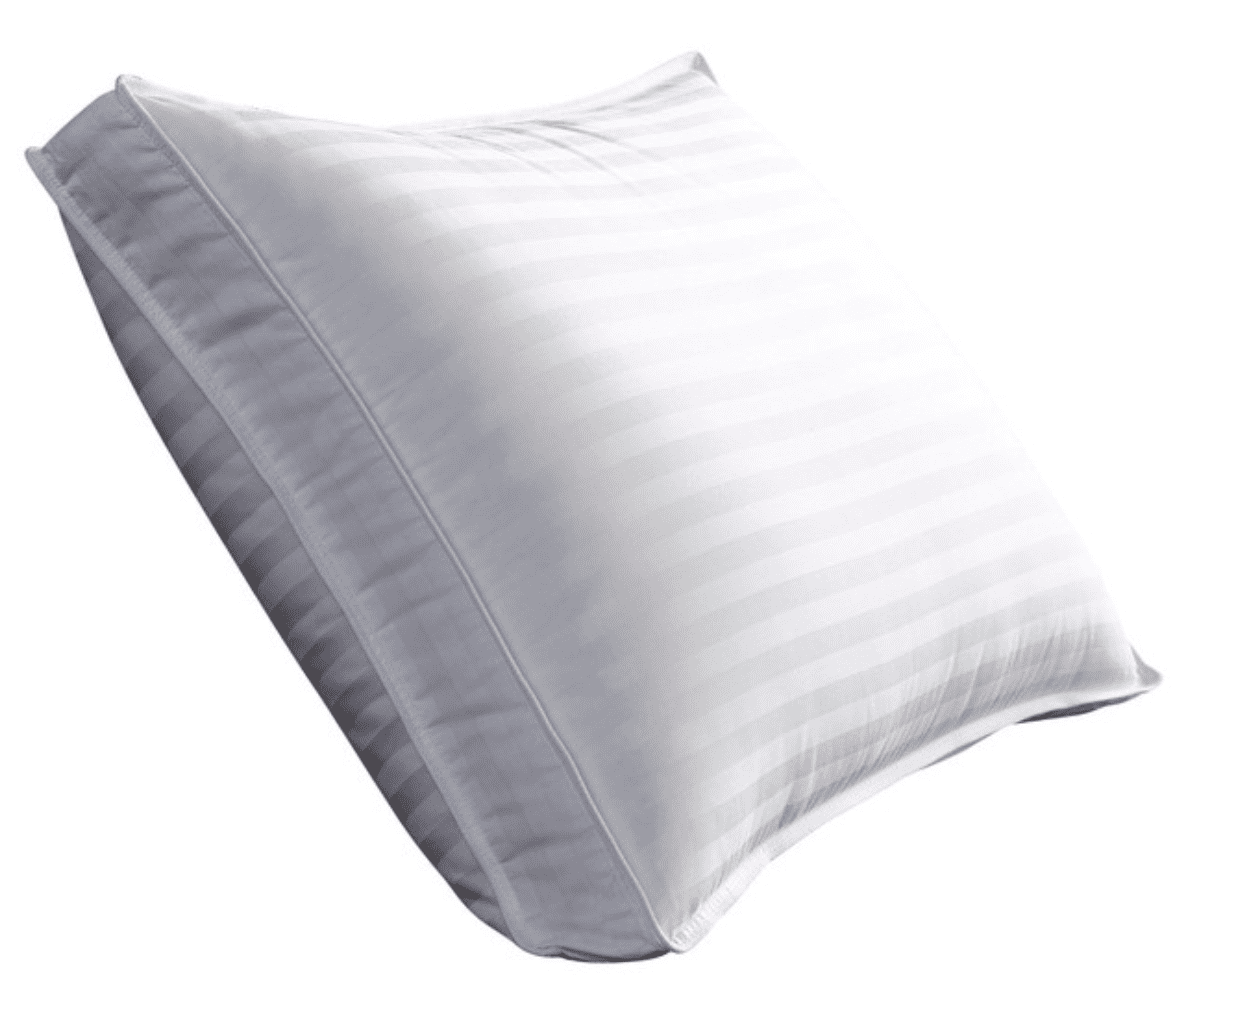 SUPERIOR HOTEL QUALITY Duck Feather & Down Healthguard ANTI-ALLERGY LUX PILLOW 